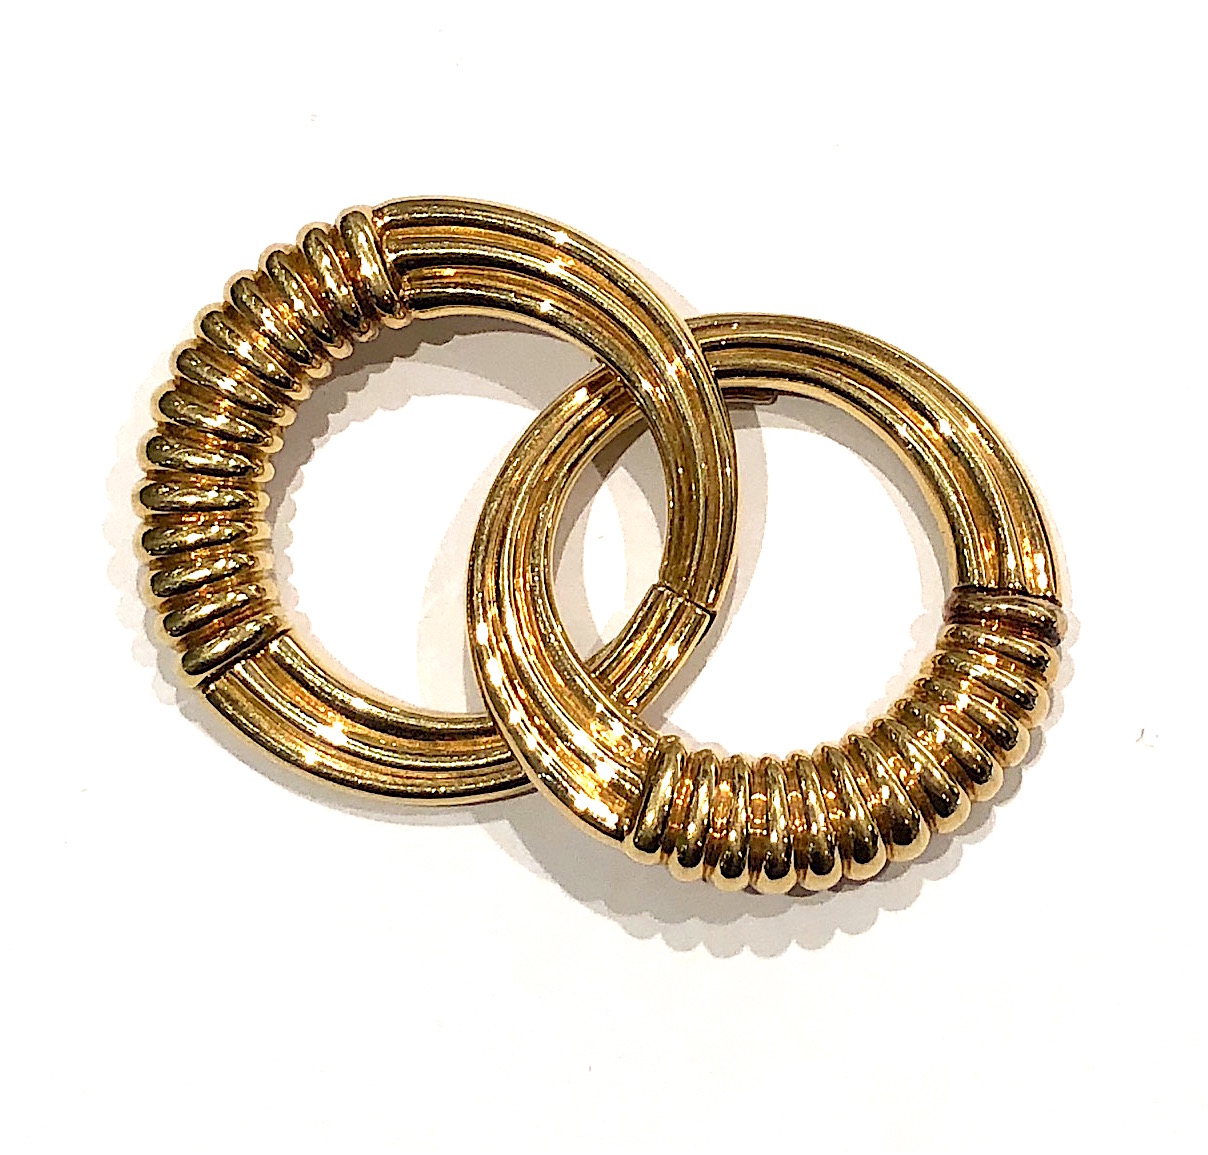 Van Cleef & Arpels circular stylized clip brooch in 18K gold with a ribbed motif, signed: VCA, Or, 750, copyright 88, VCA French touchmark in a diamond, no. B3378R5, c. 1980’s